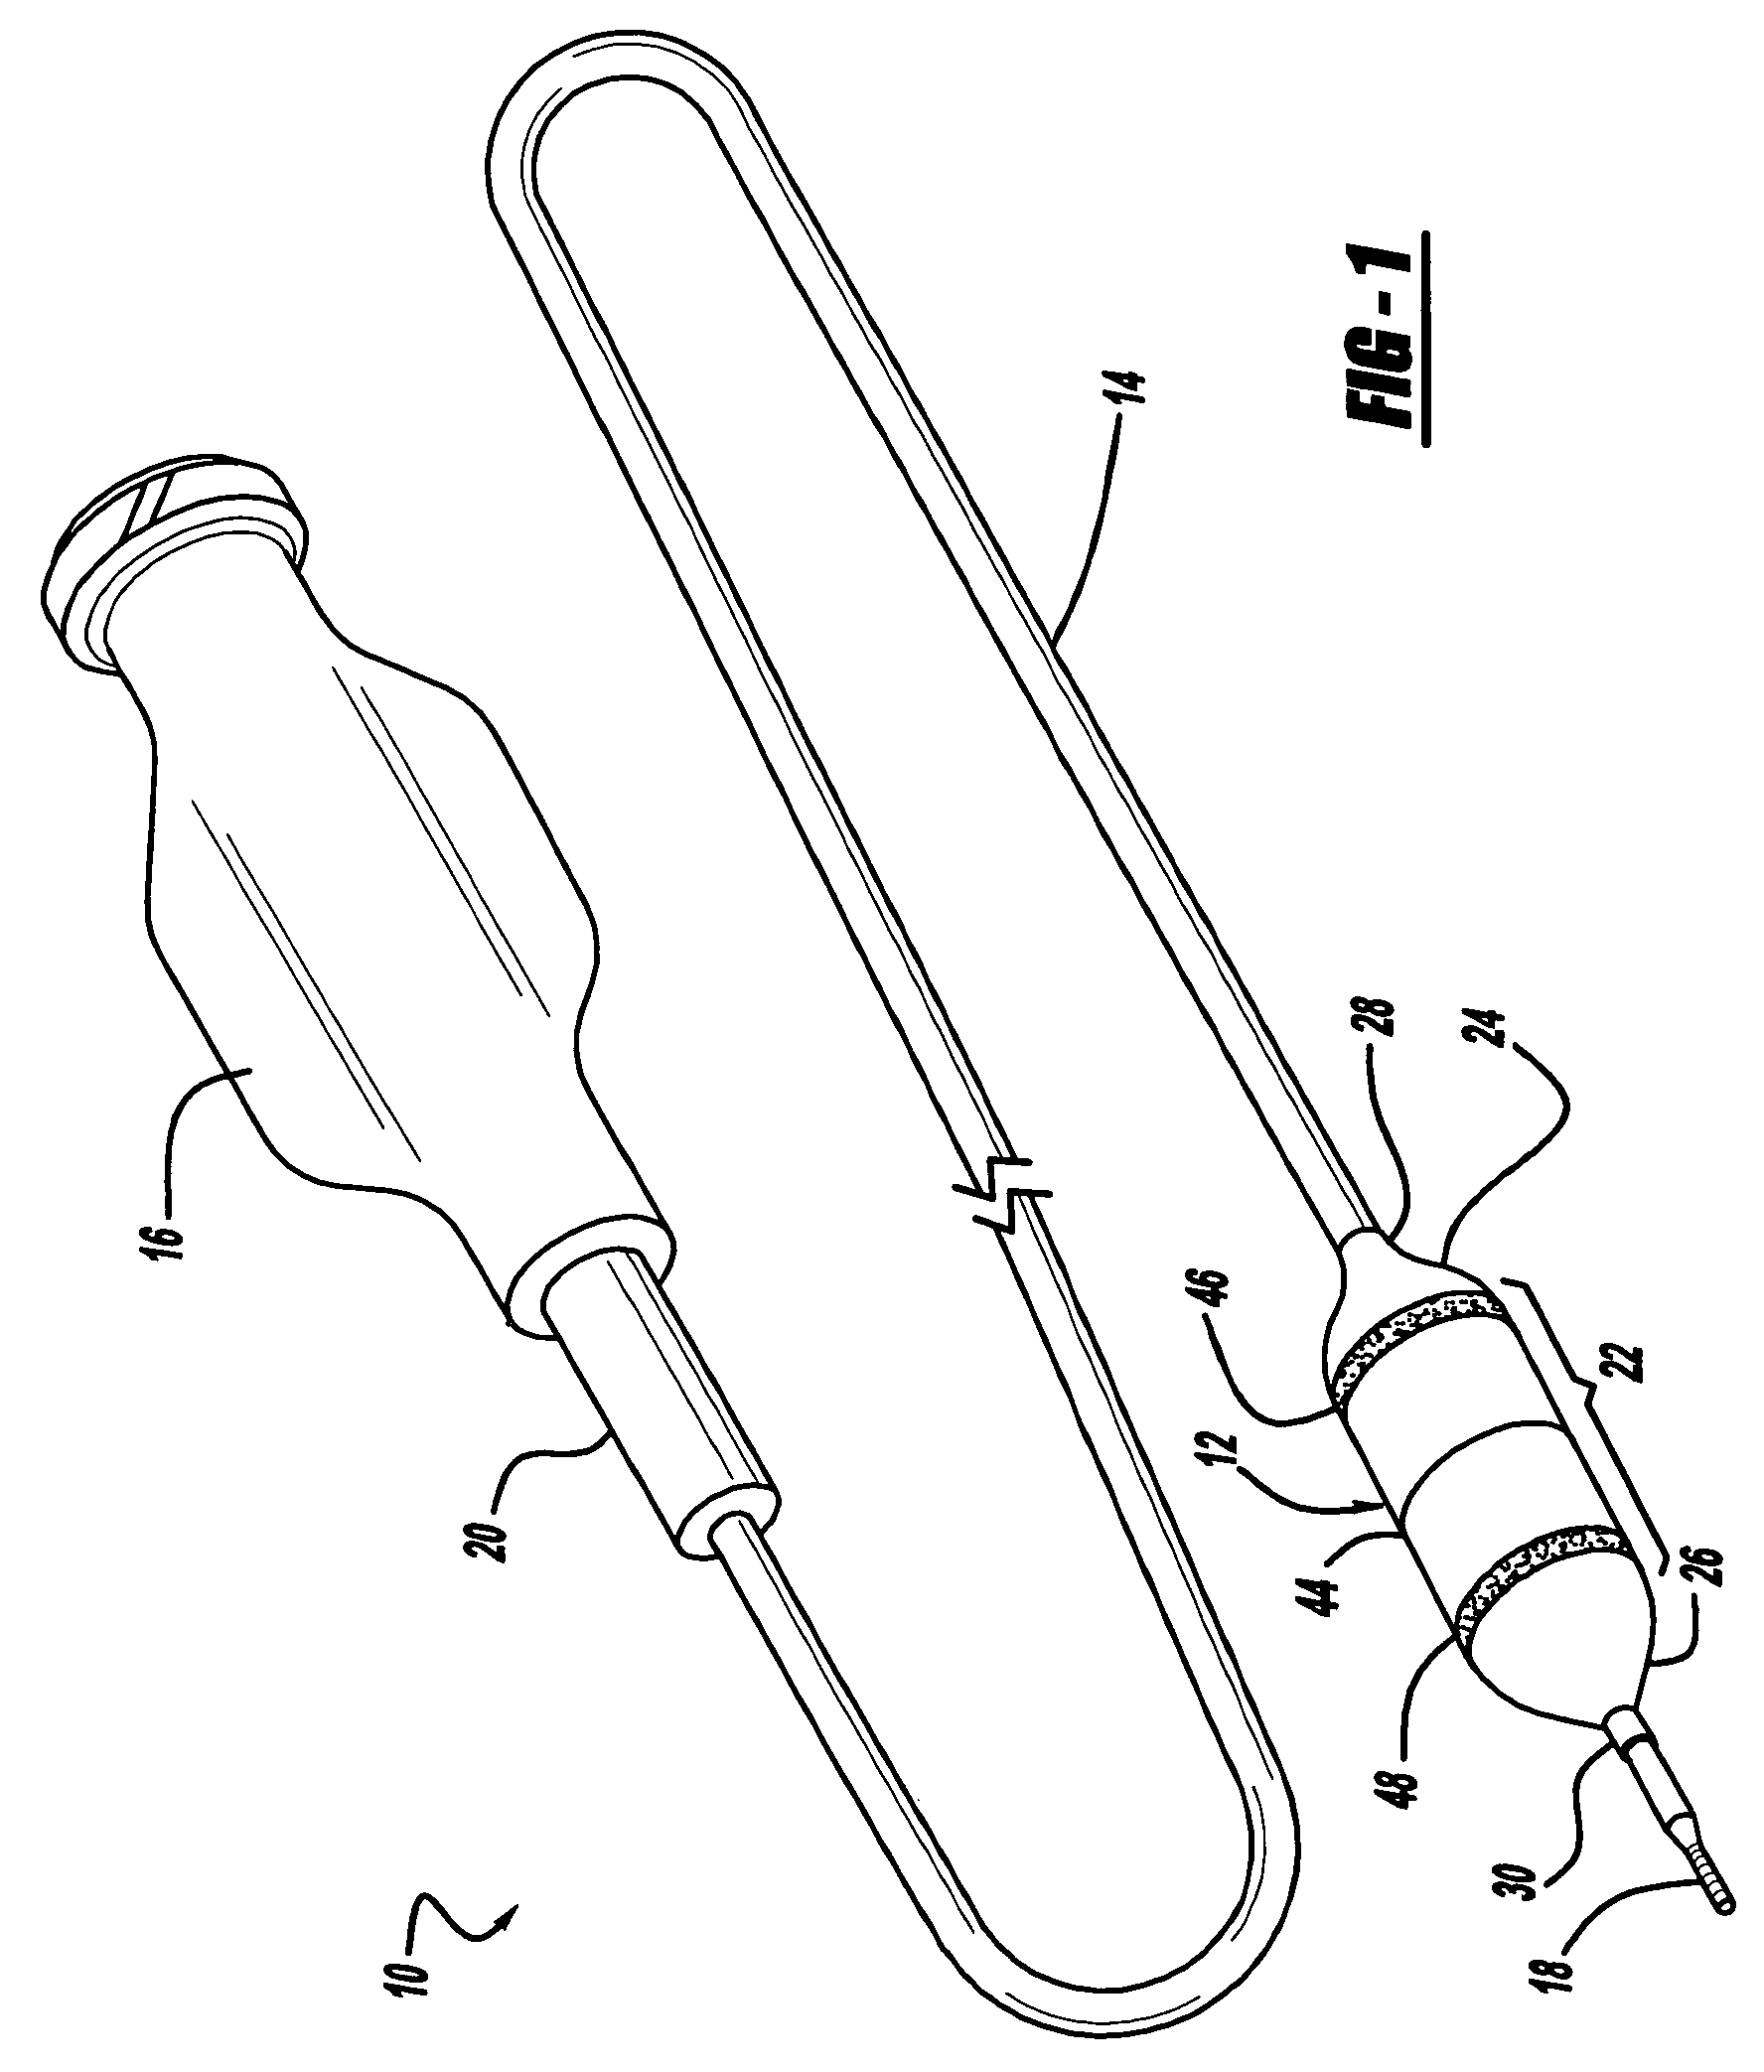 Esophageal balloon catheter with visual marker